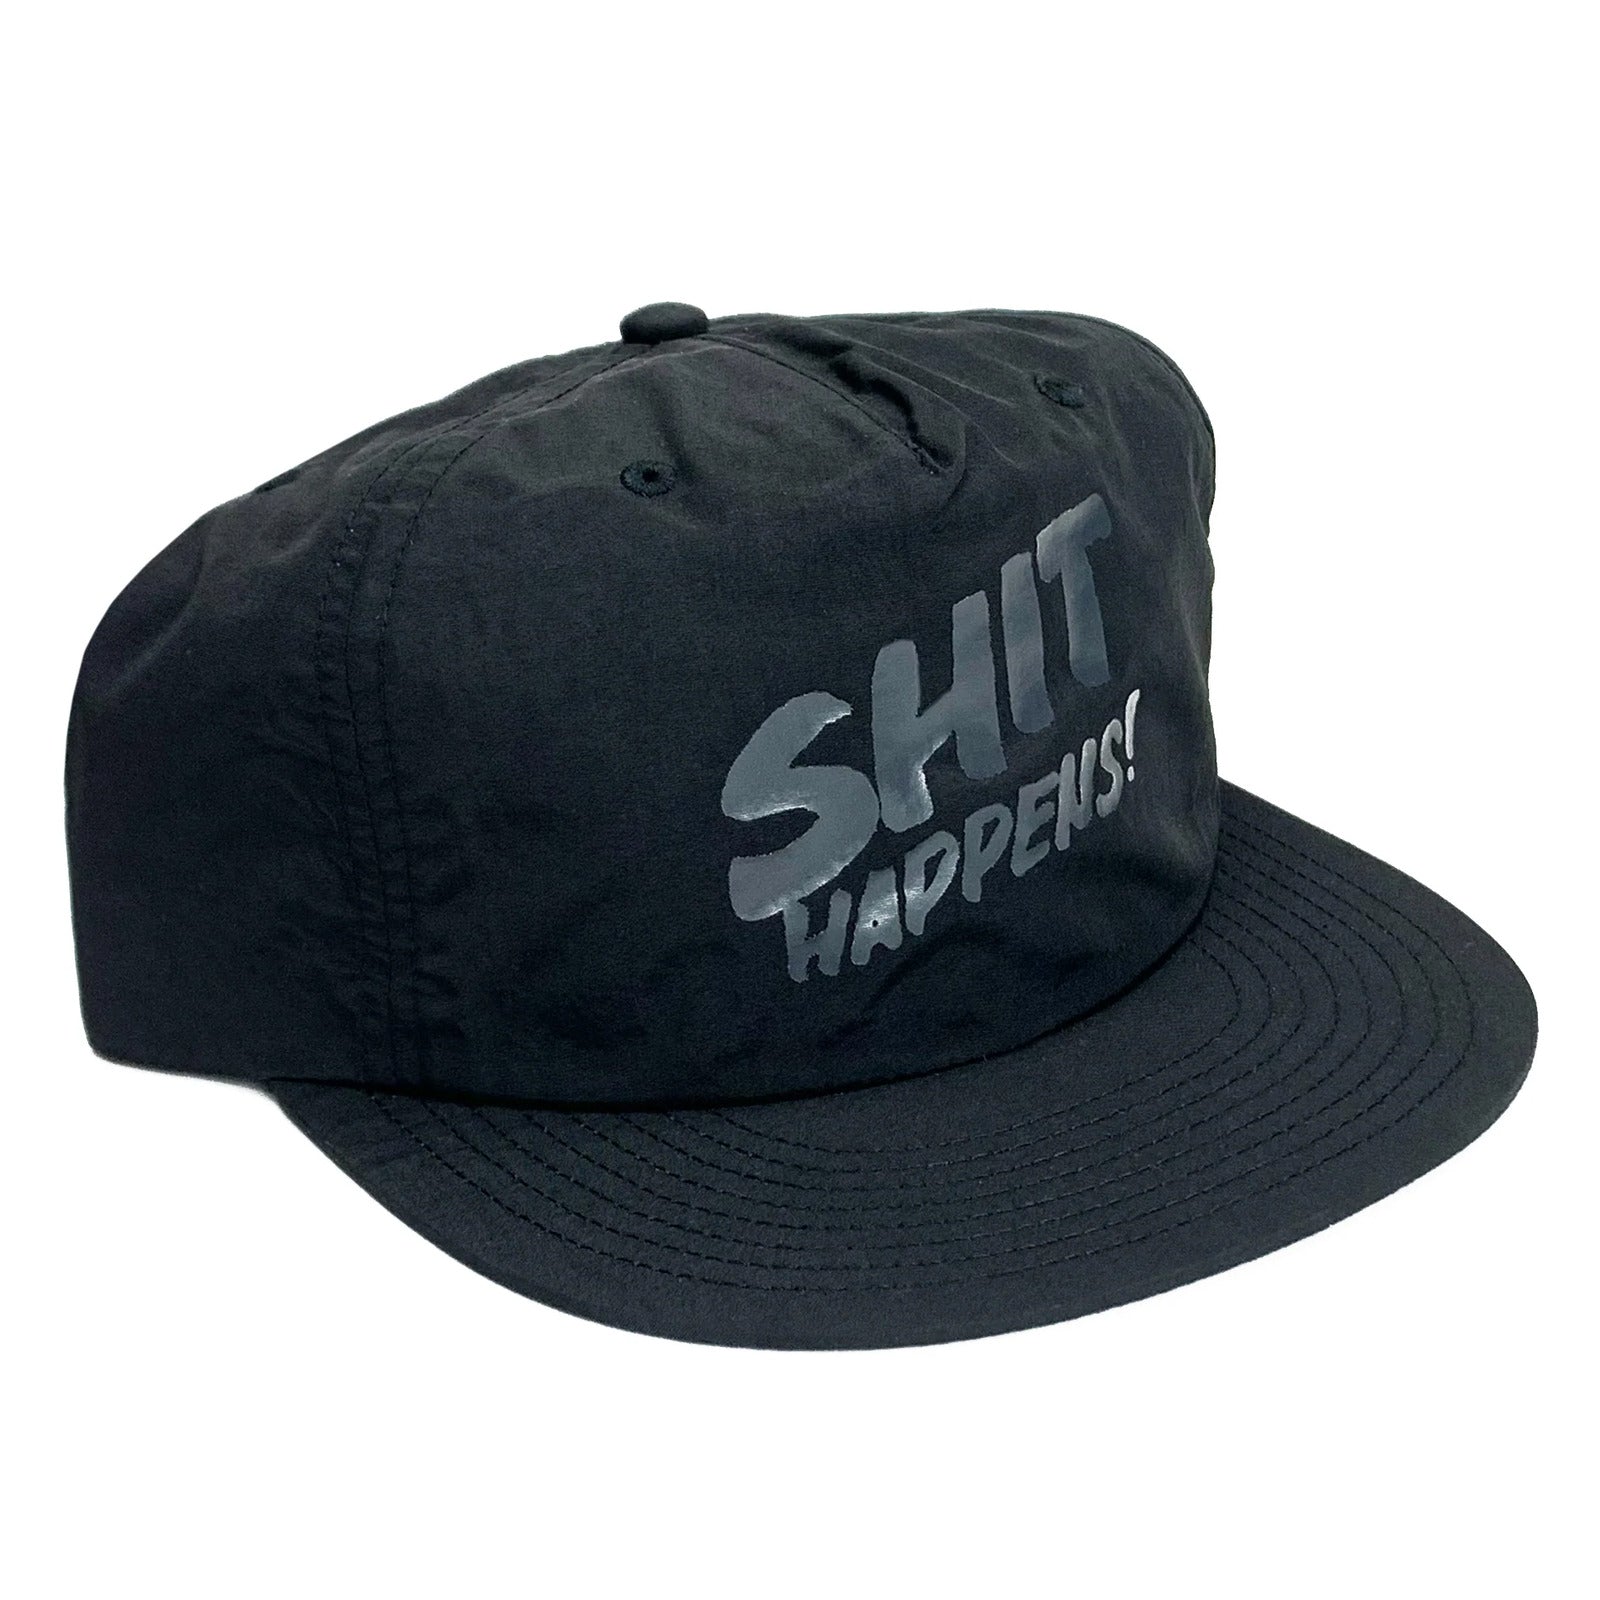 A lightweight quick dry nylon black cap with the words "SHIT HAPPENS!" printed in bold, gray letters on the front. This Cult Sh*t Happens Cap is both stylish and practical.